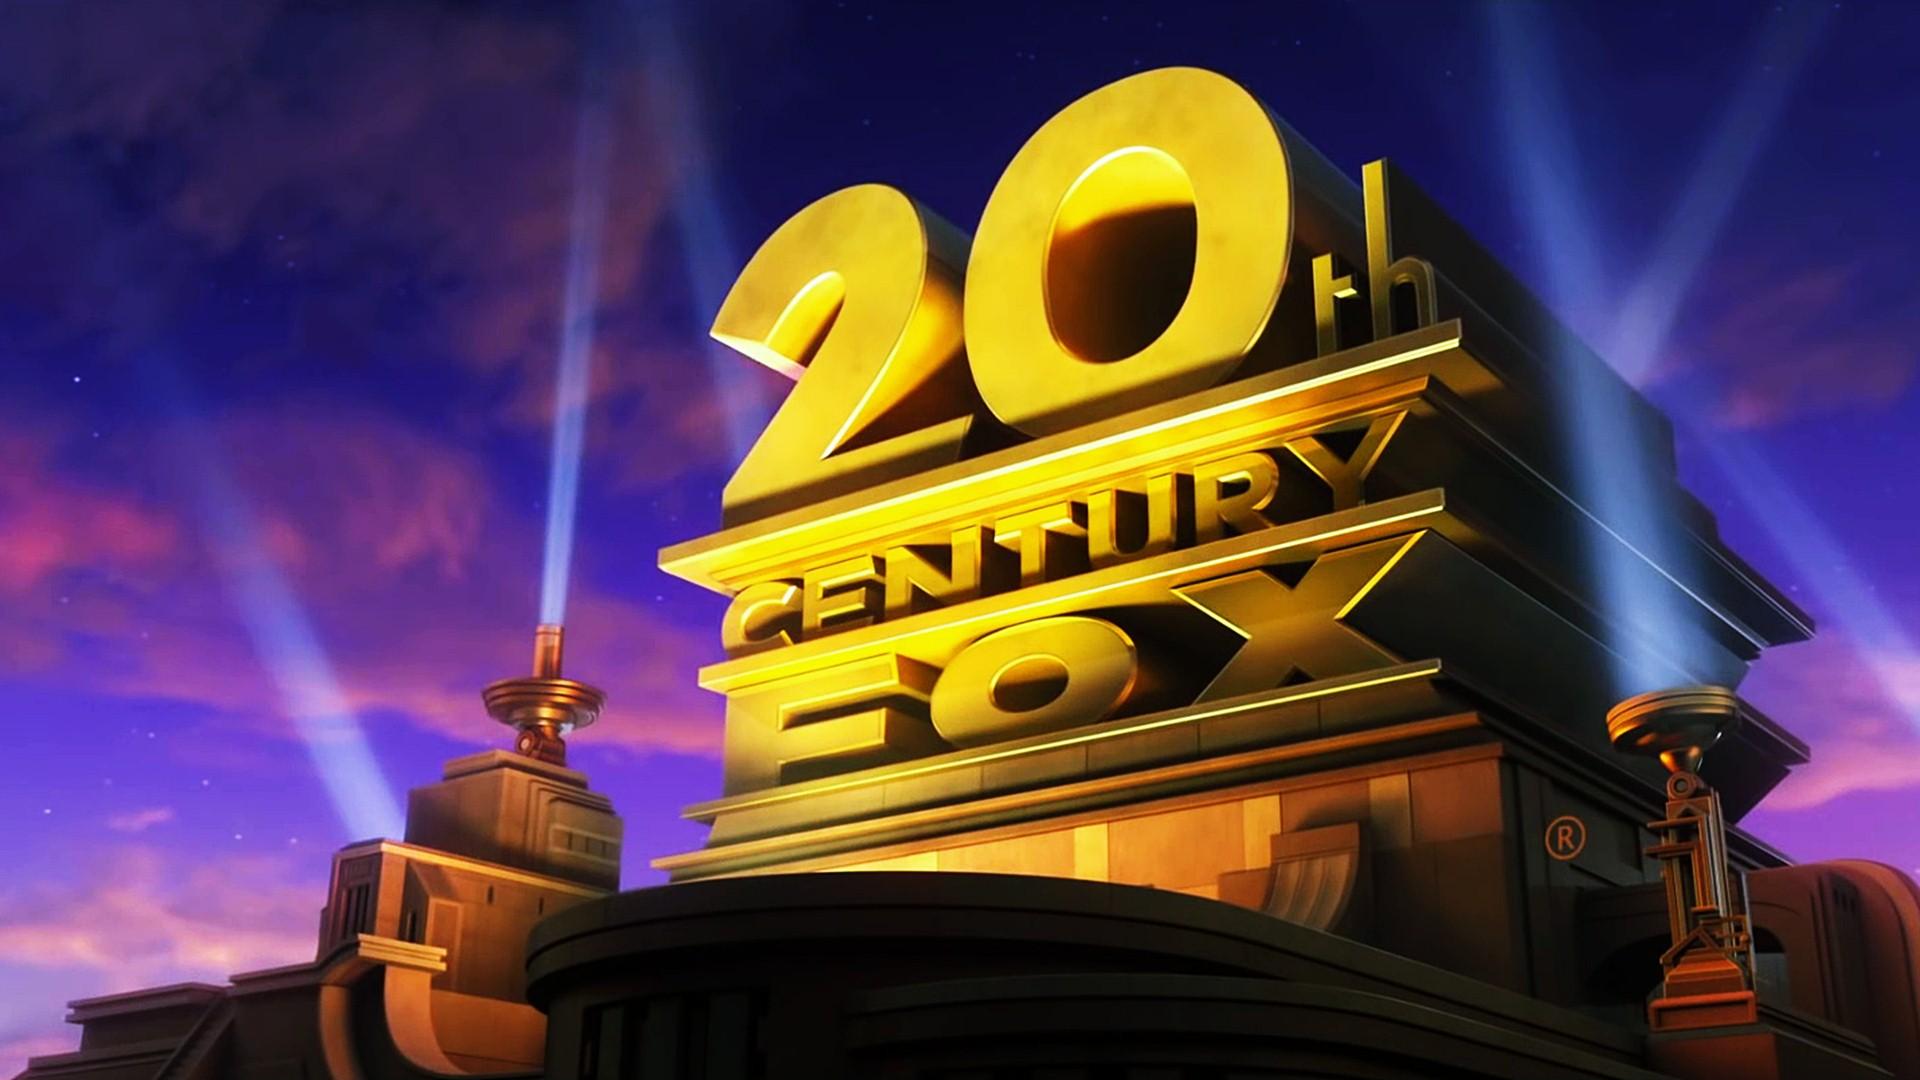 Th Century Fox Wallpapers 2K Backgrounds, Wallpaper, Pics, Photos